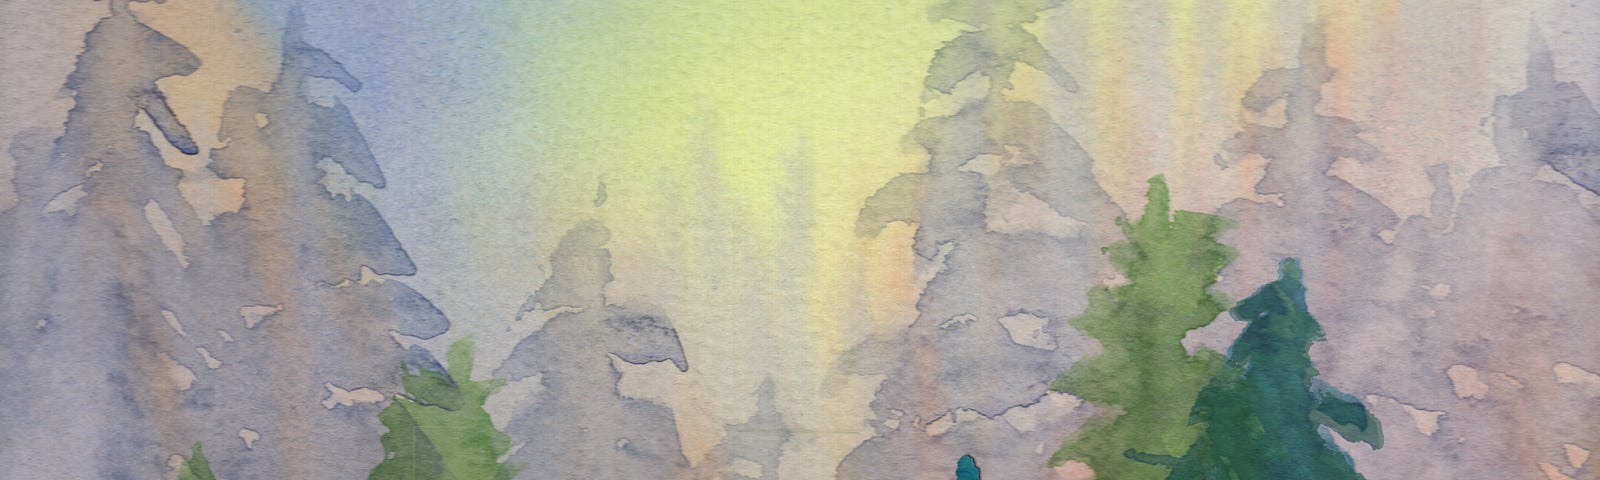 Painting with fir trees near and far.